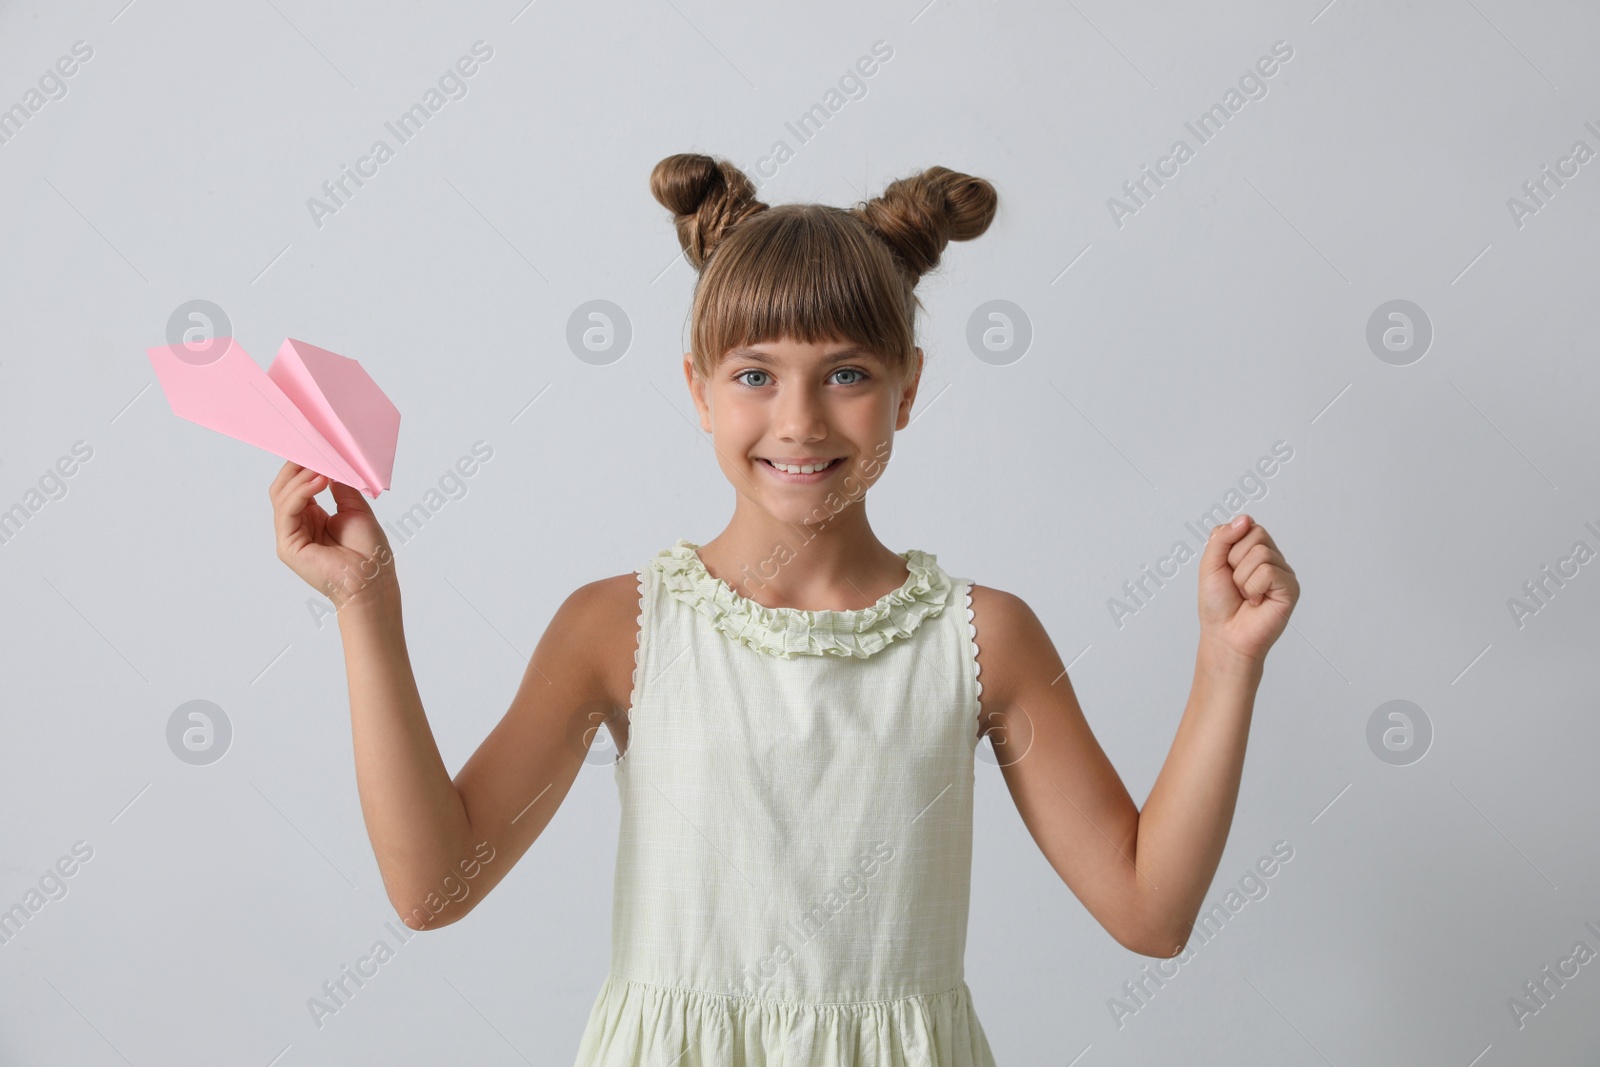 Photo of Cute little girl playing with paper plane on light grey background